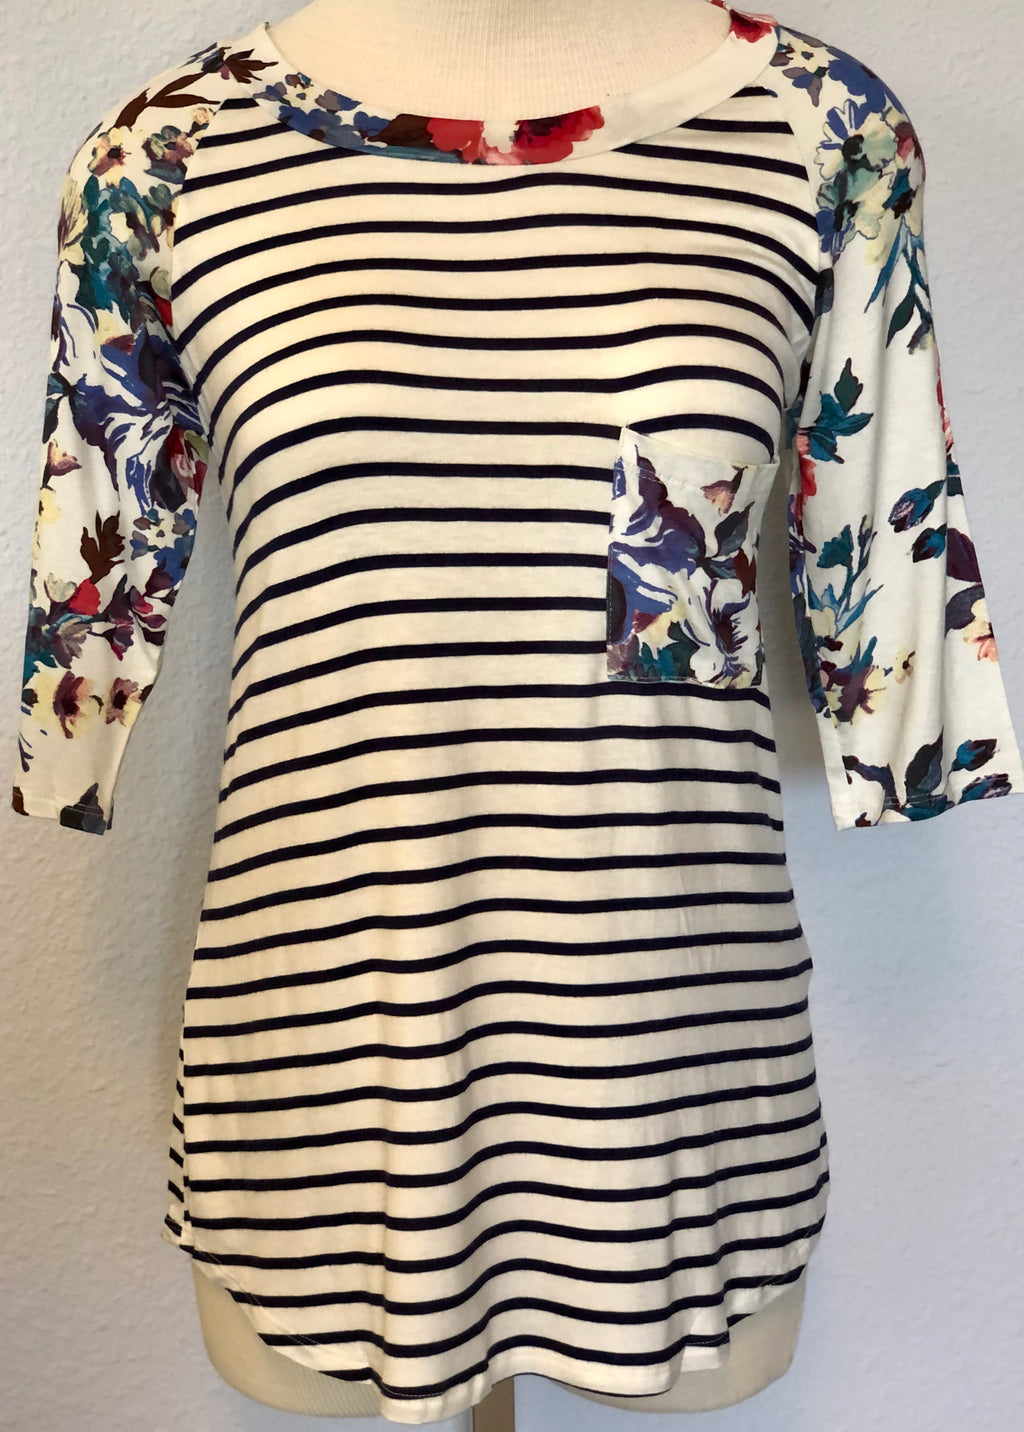 STRIPED FLORAL SLEEVE TOP